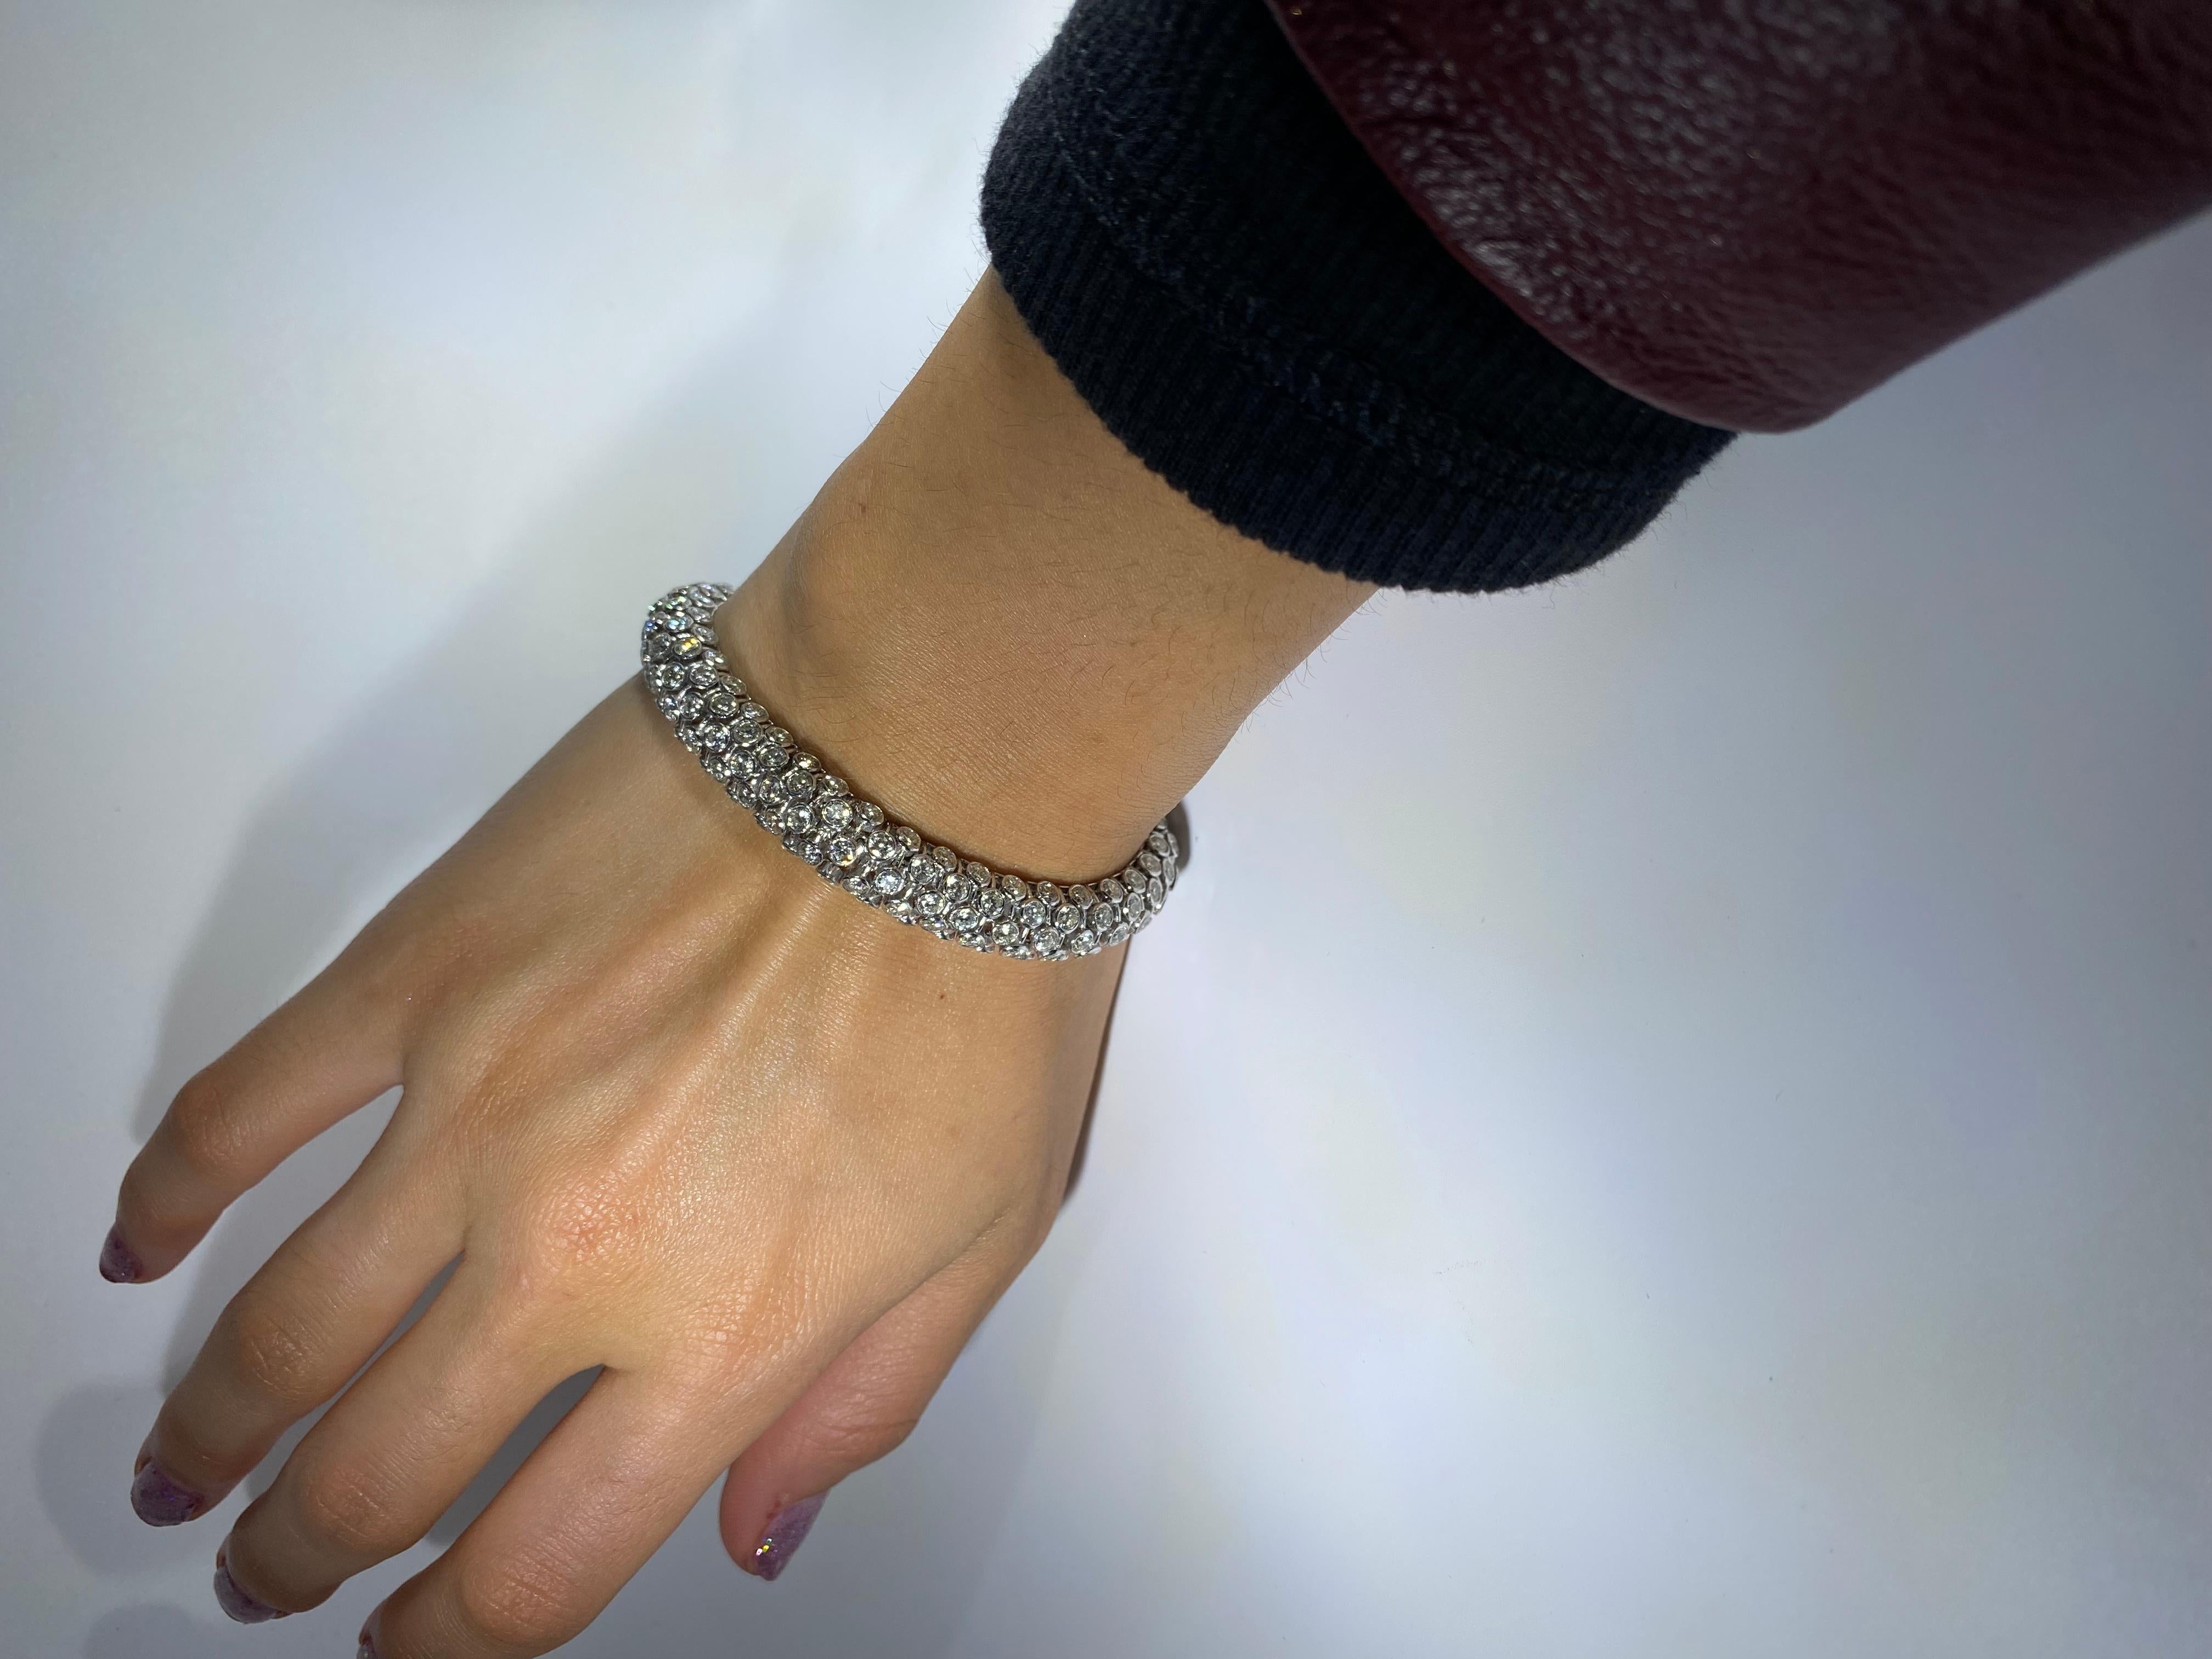 Elevate your style with our stunning Serpent Diamond Bracelet, meticulously crafted in 18K white gold. Adorned with a magnificent 16.50-carat array of round brilliant diamonds, this bracelet exudes modern elegance. Its versatile design seamlessly